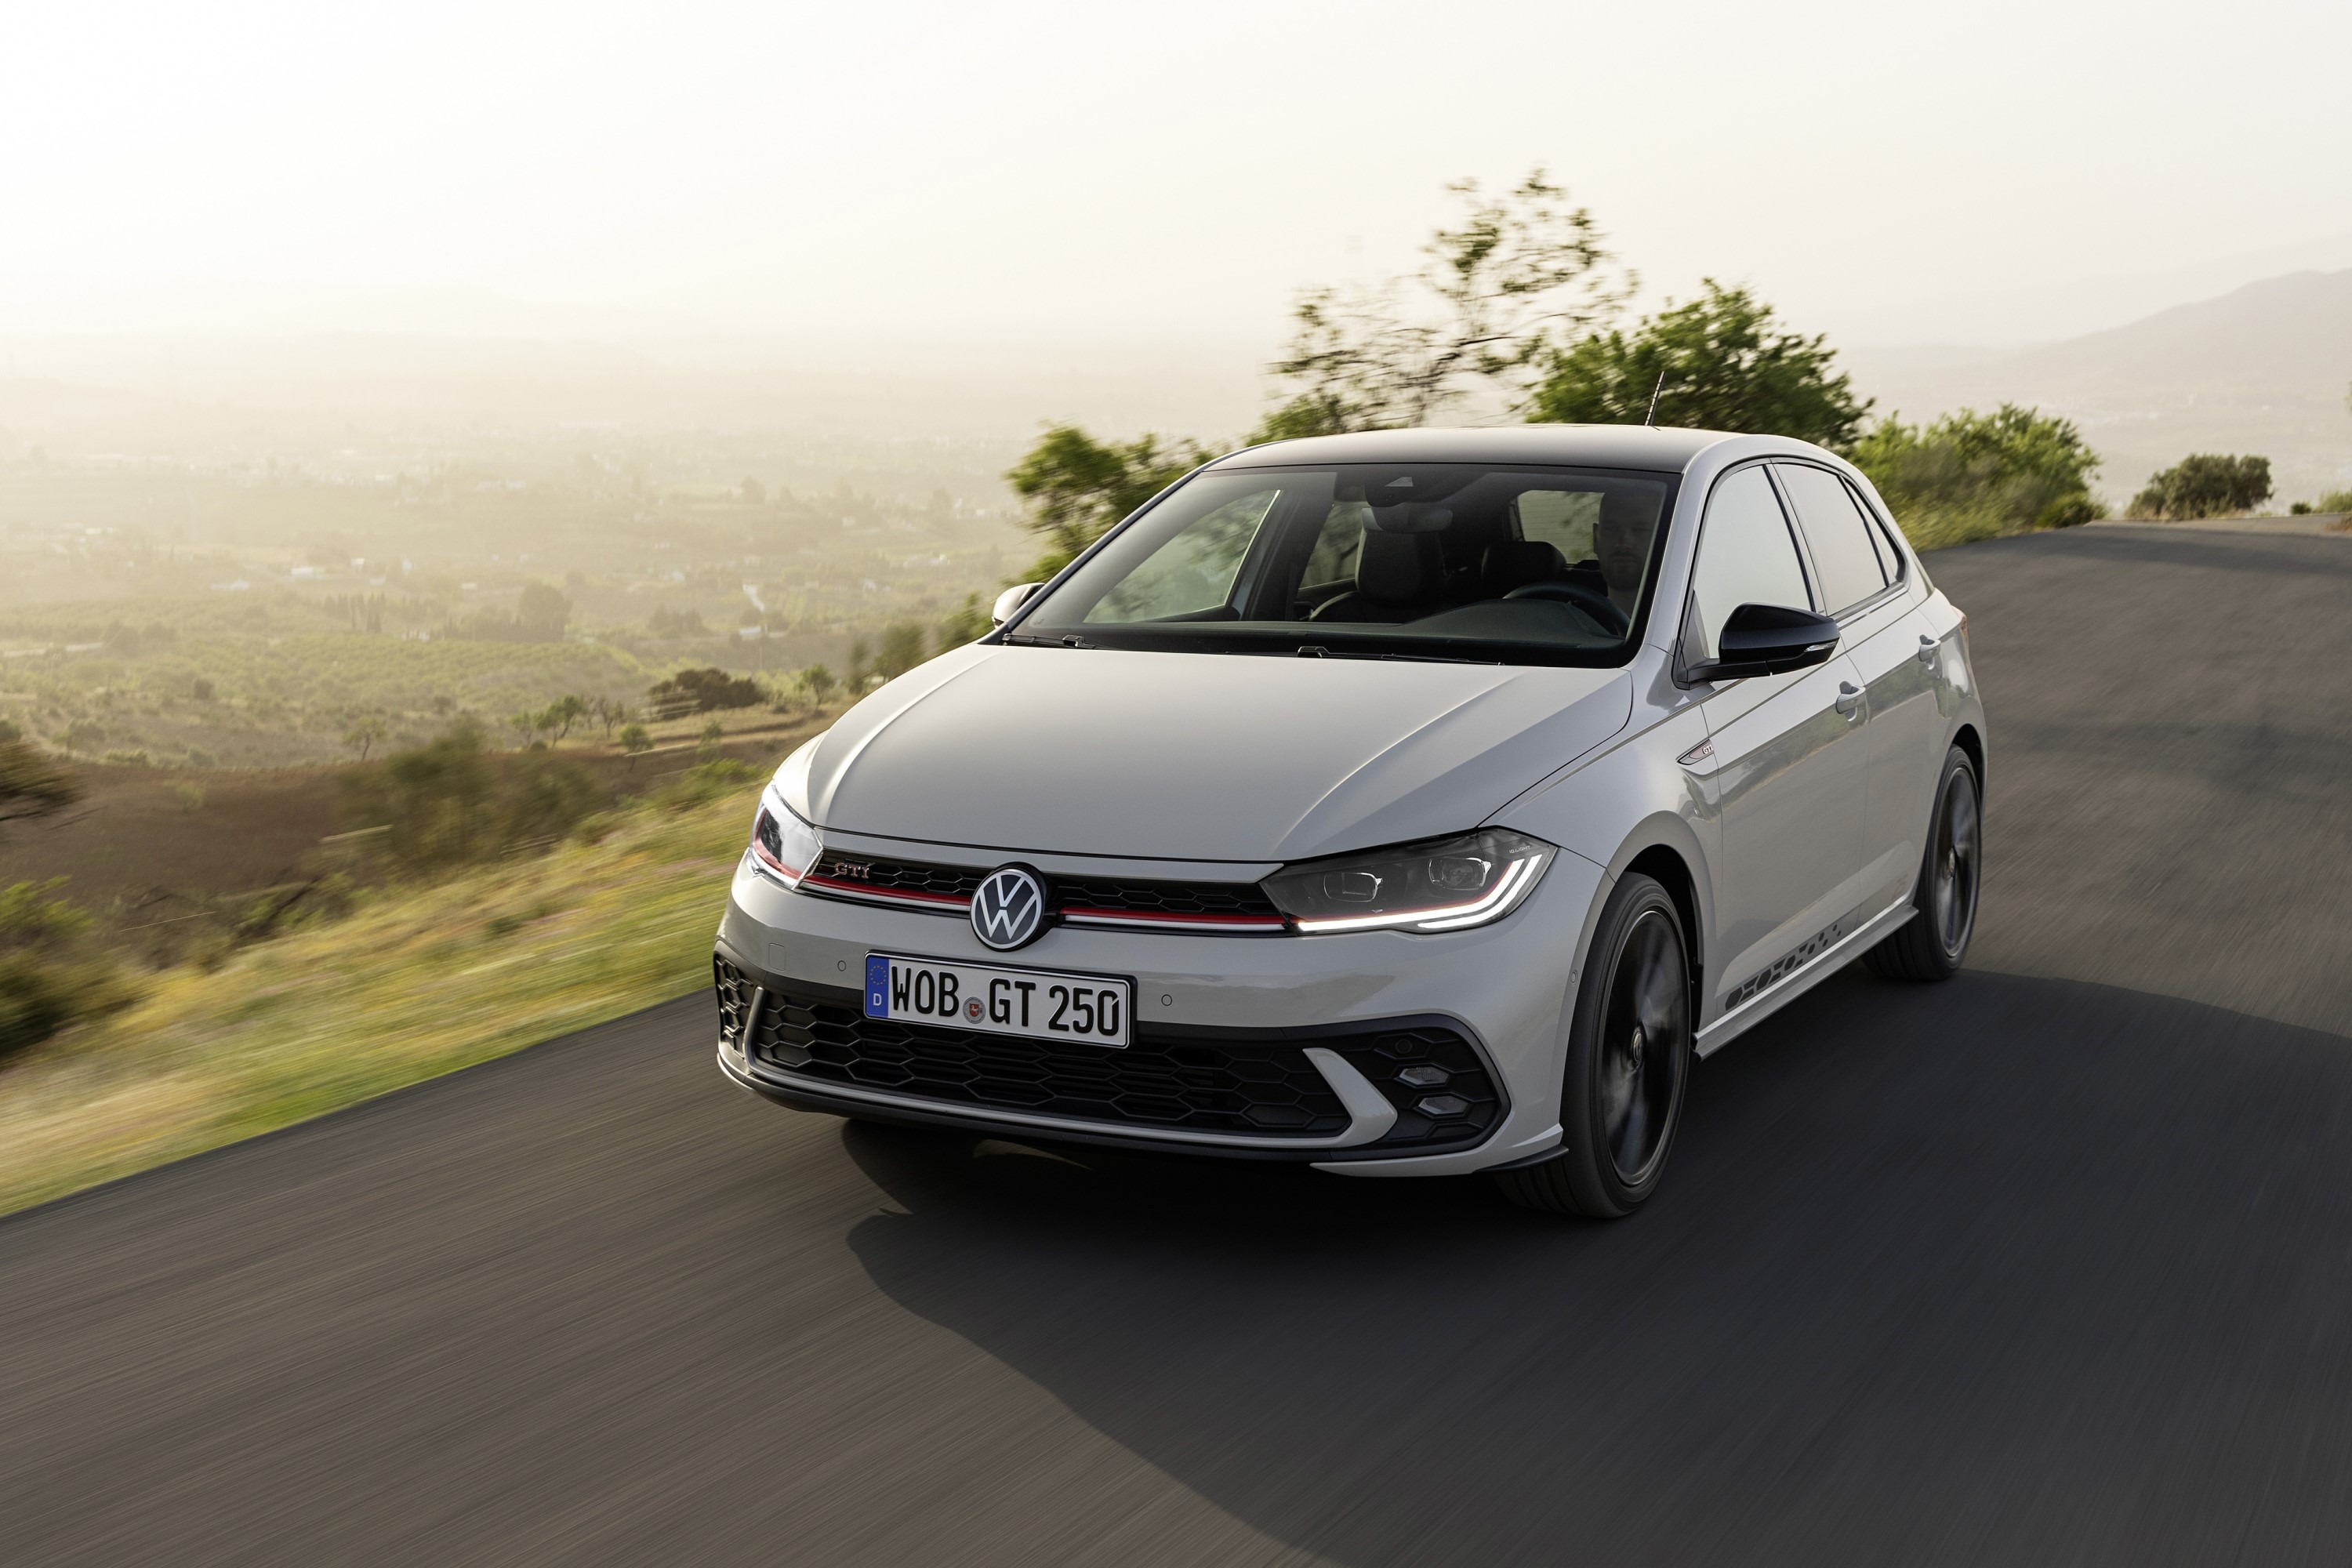 The Special Edition Polo GTI 